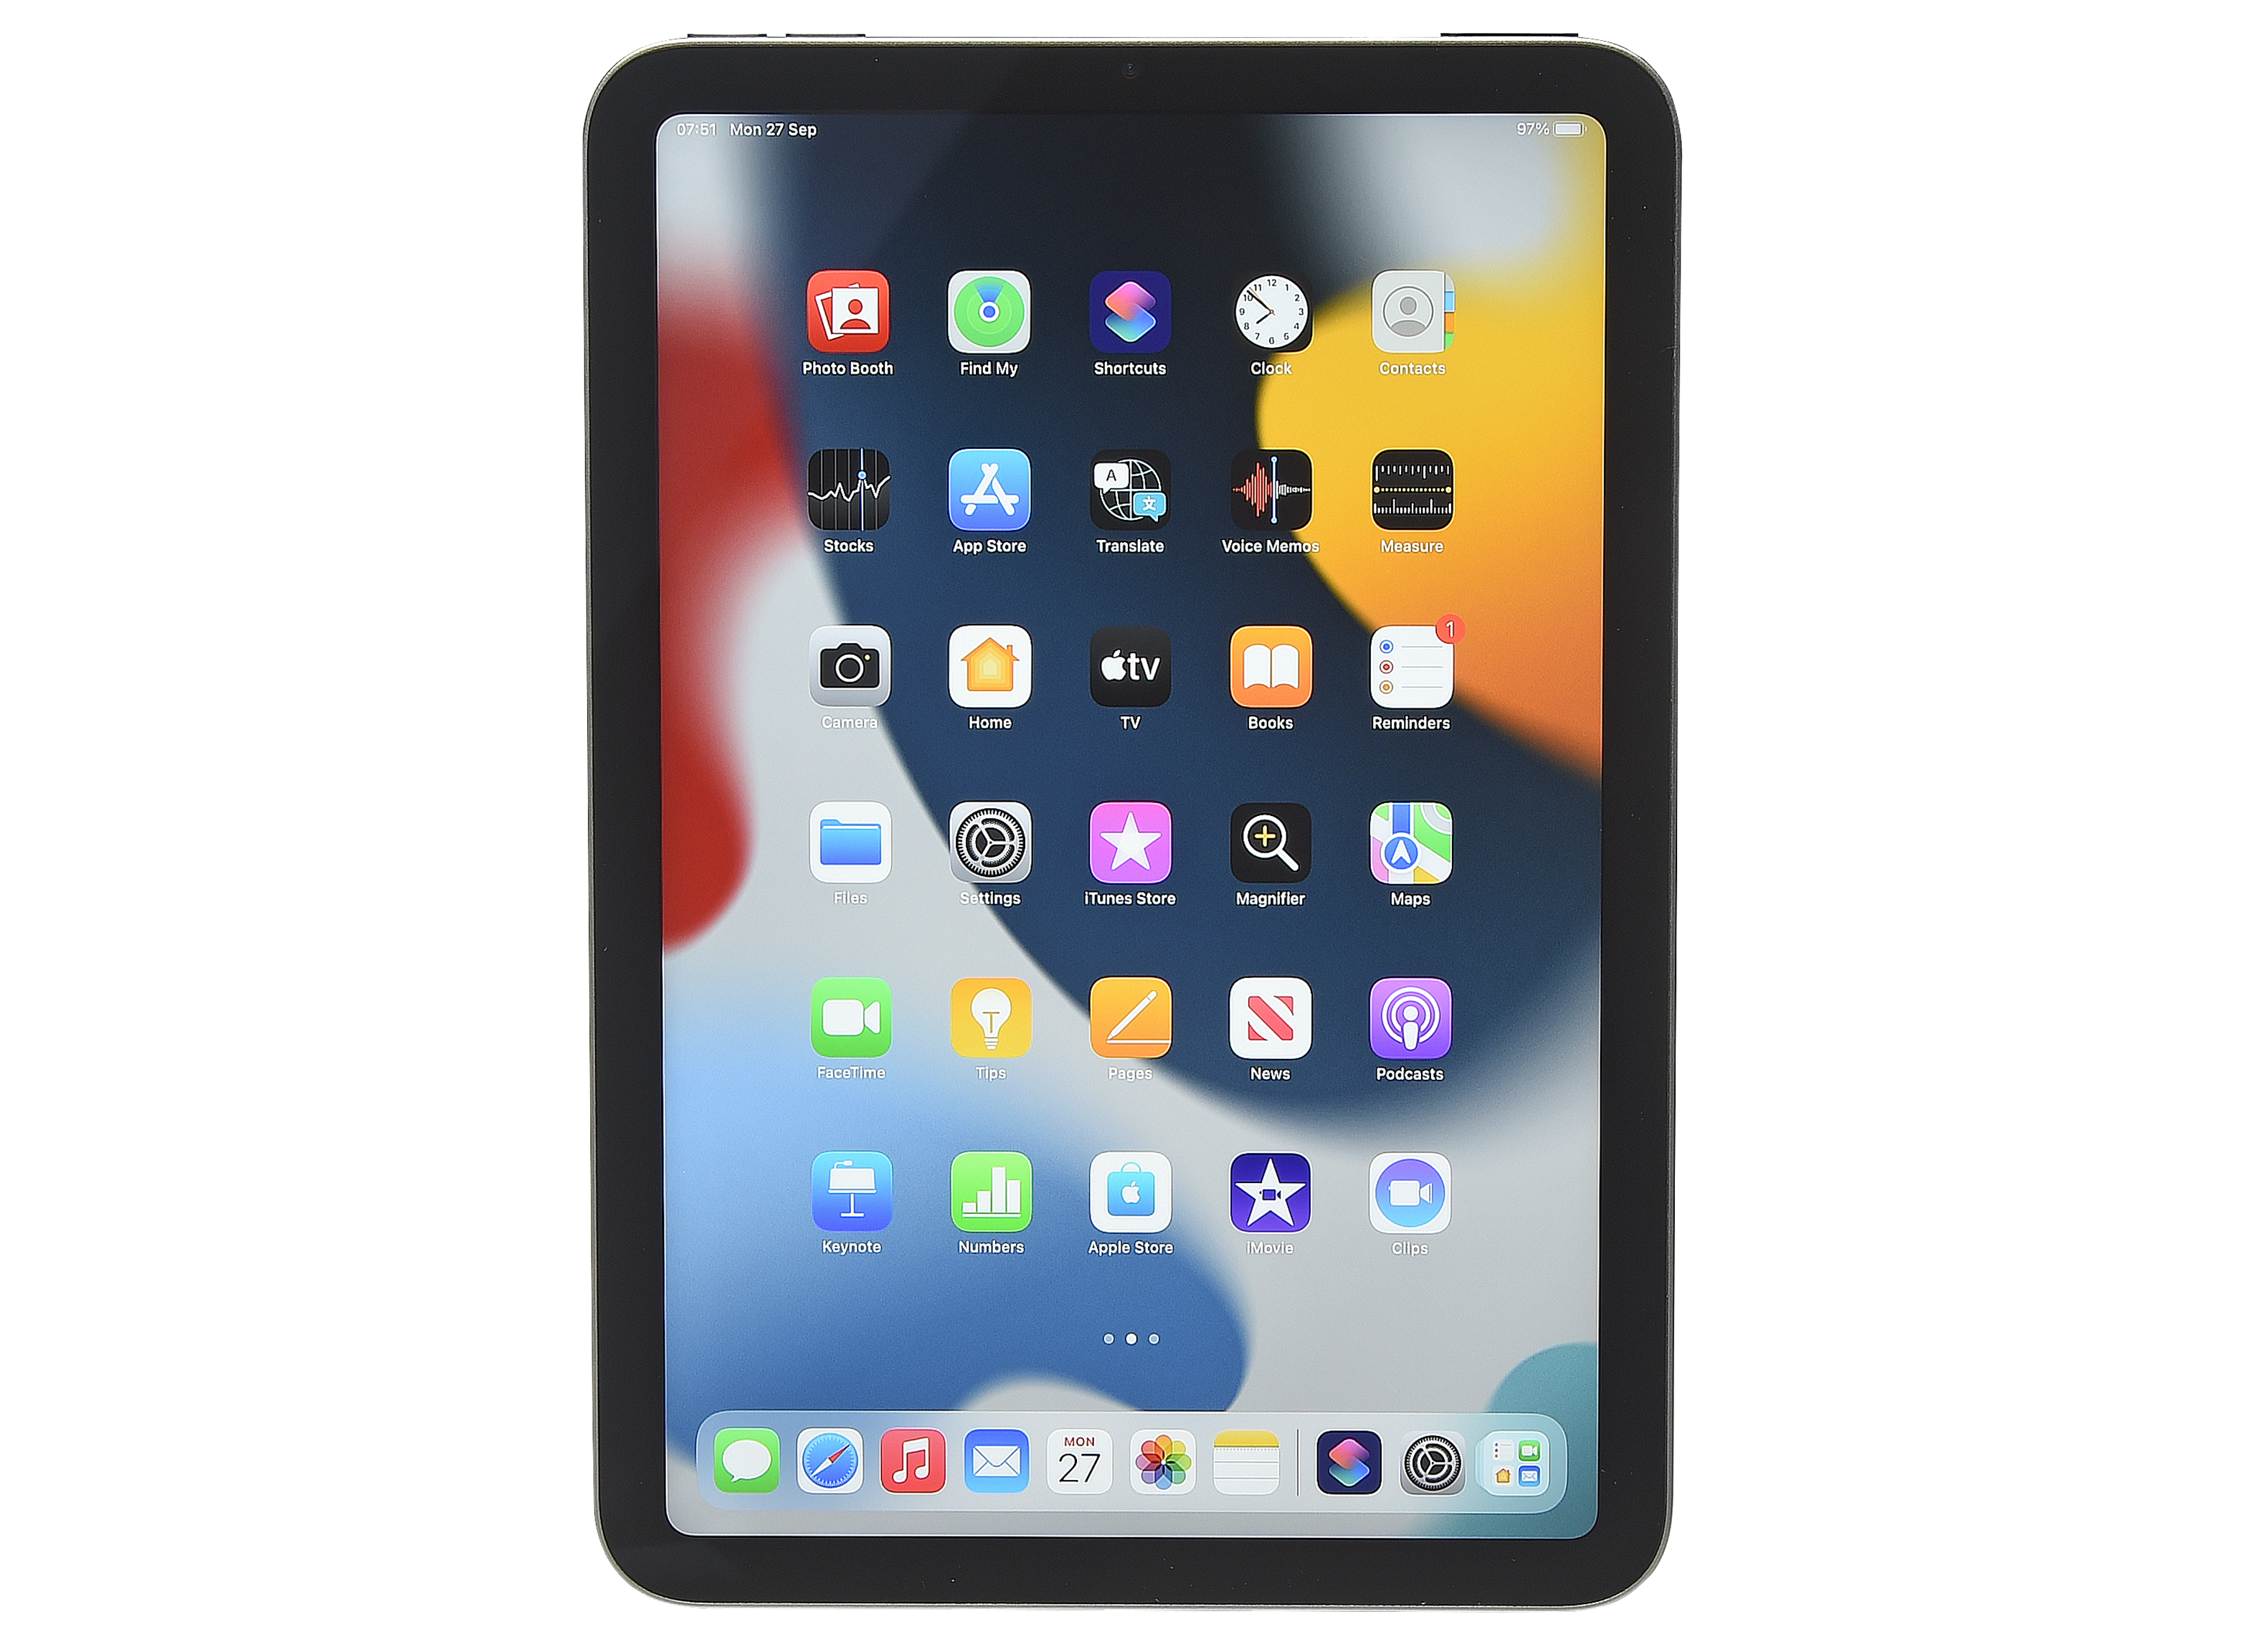 Apple iPad Mini (5G, 64GB)-2021 Tablet Review - Consumer Reports